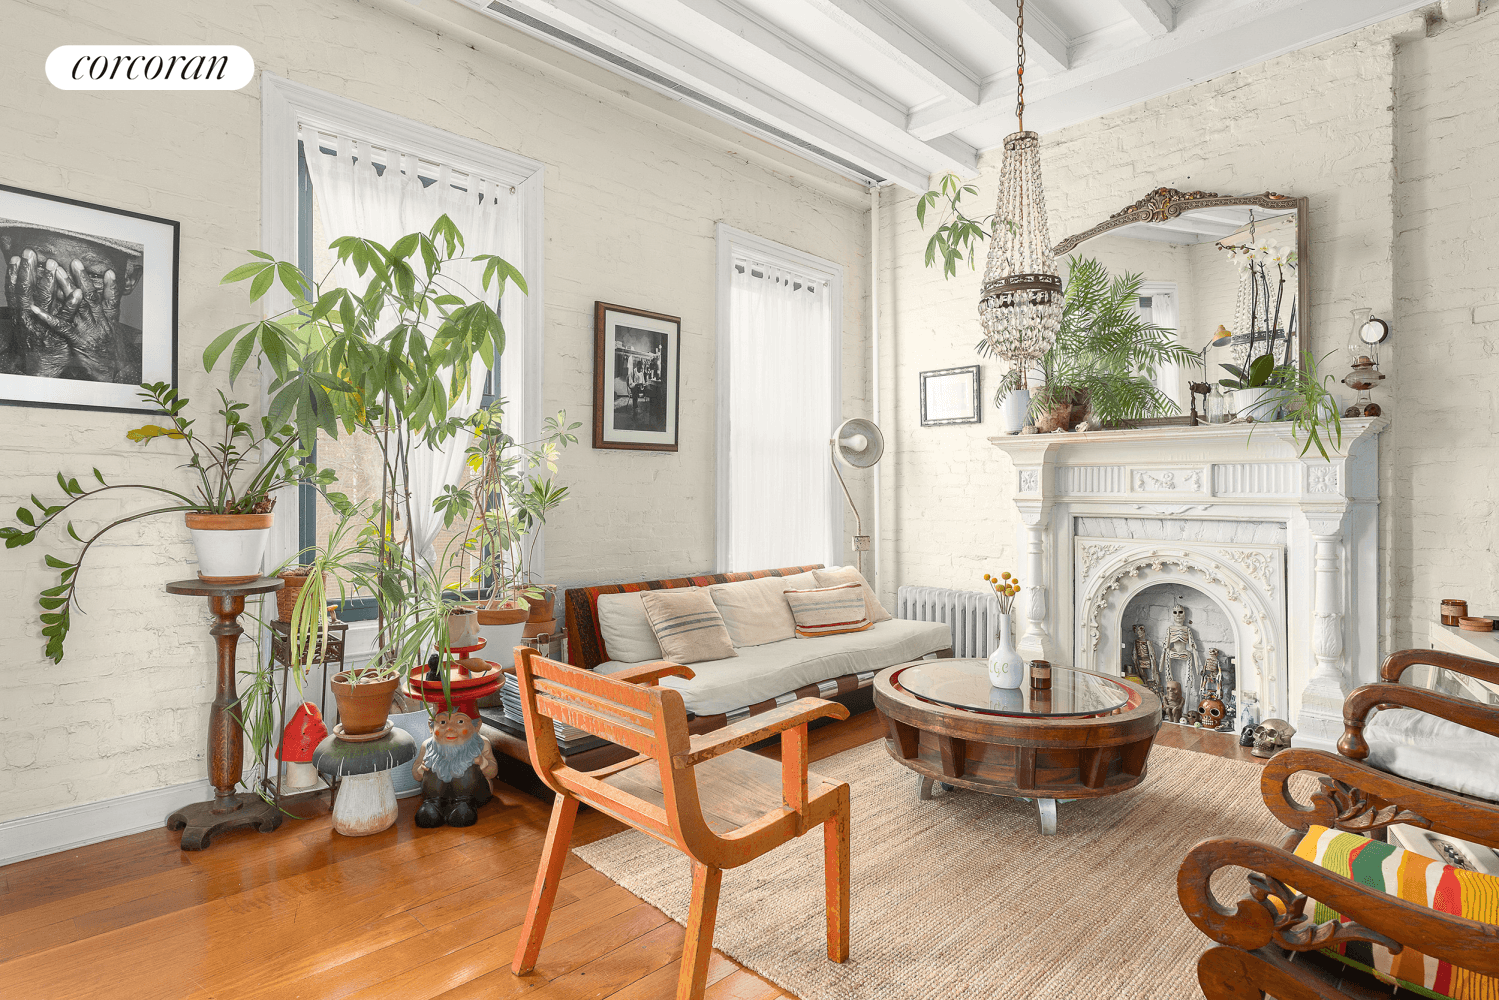 Available short term, this fully furnished and beautifully designed duplex apartment spans the upper floors of a landmarked, Greenpoint townhome.